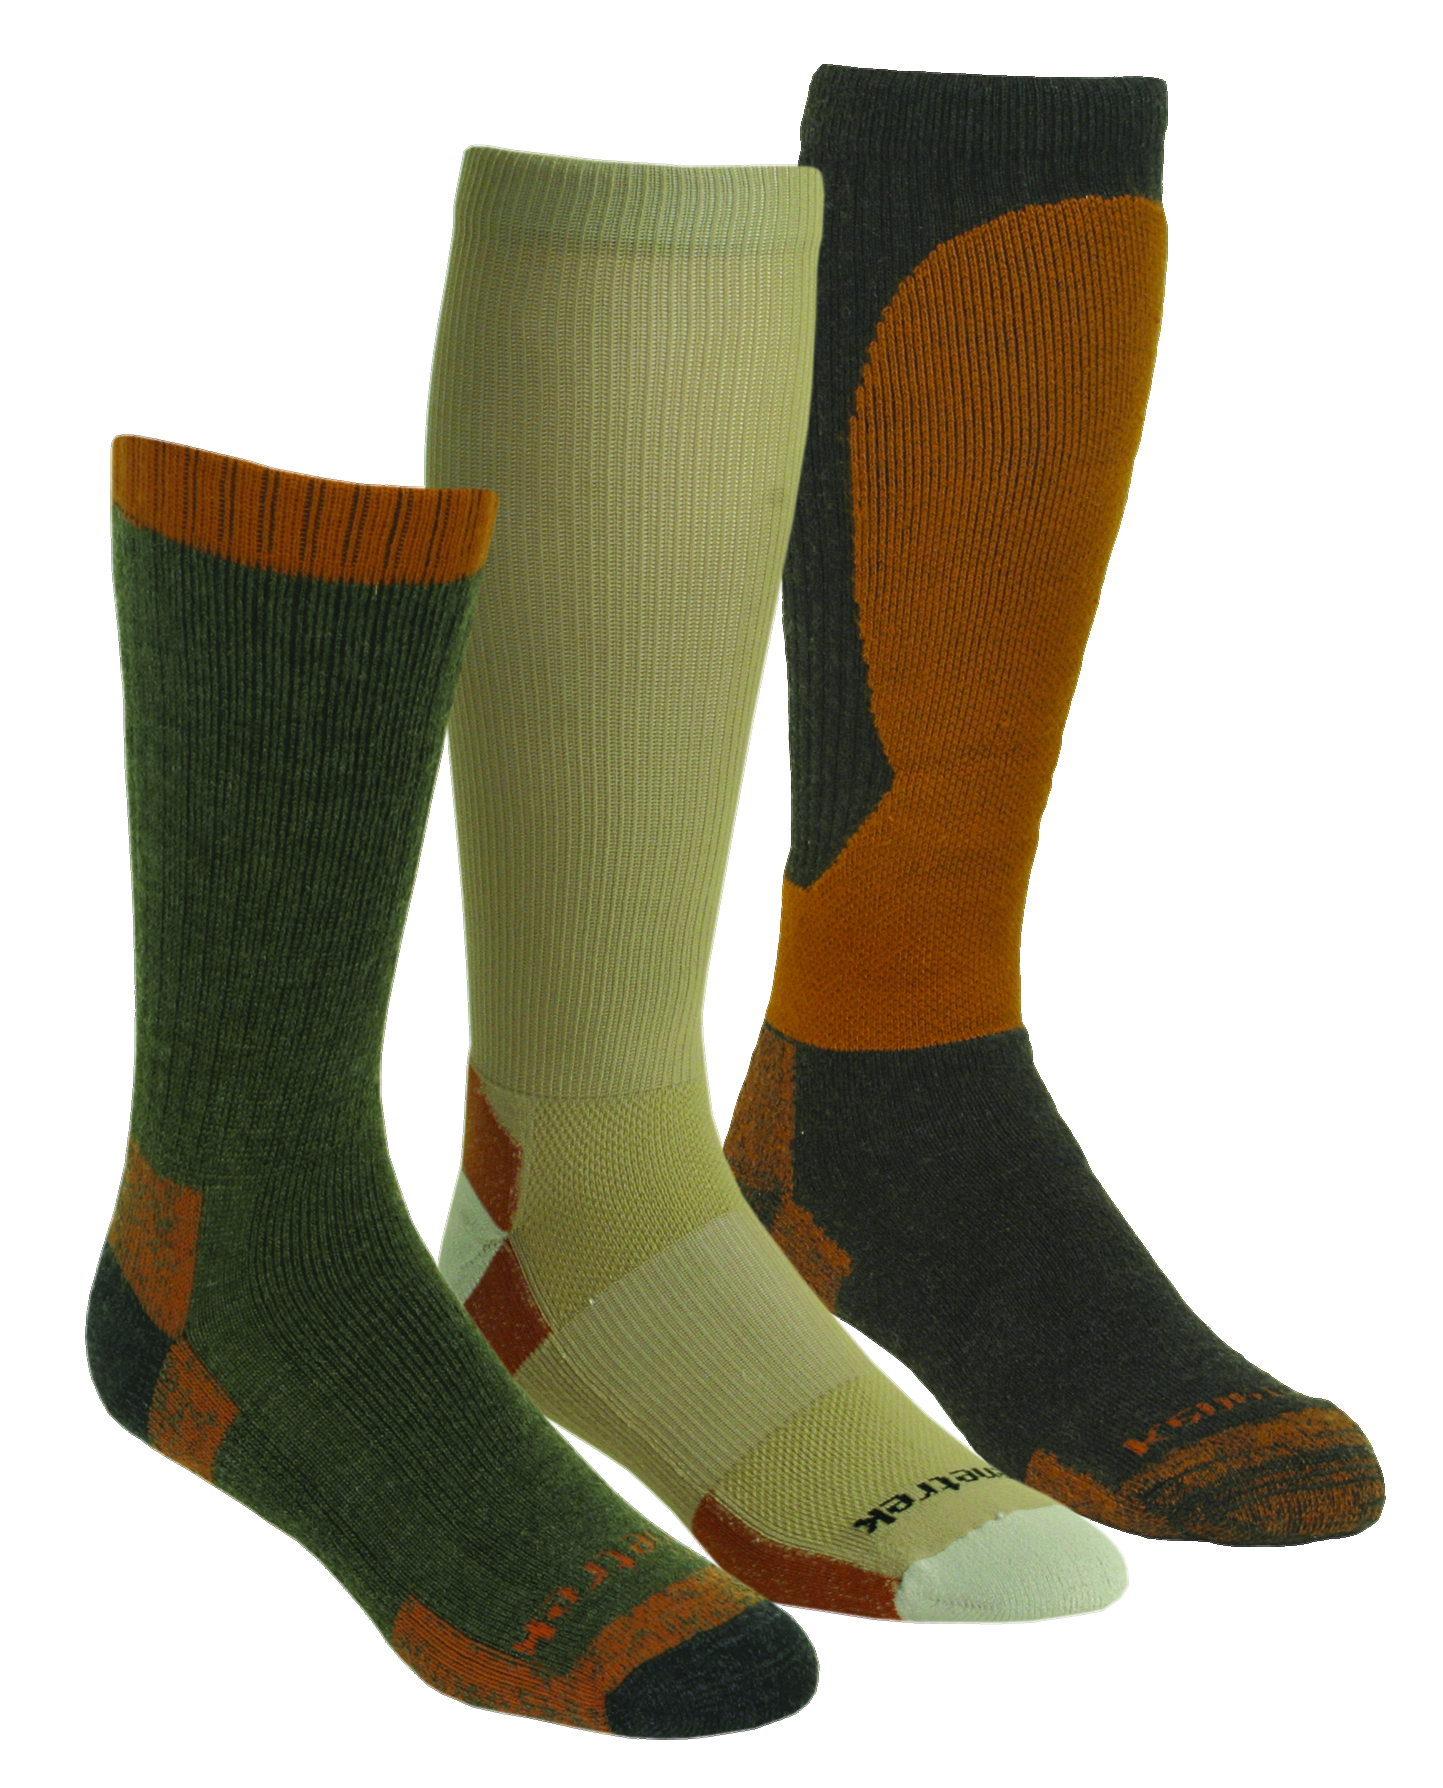 High quality socks for propper foot care